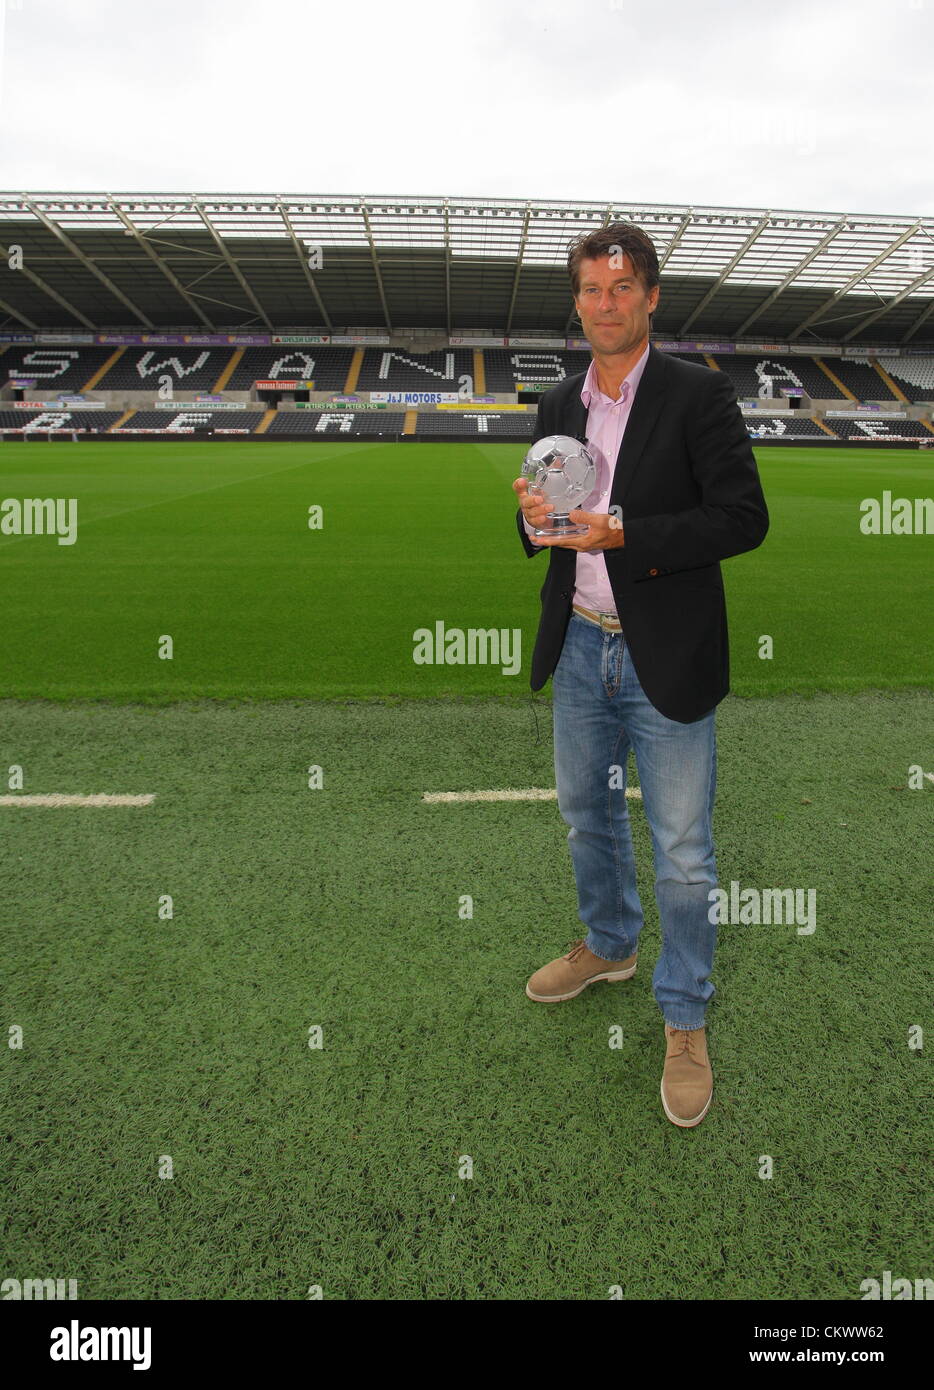 Pictured: Swansea manager Michael Laudrup with the F&C Investments League Managers Association  (LMA)performance of the week award for his team's performance against Queens Park Rangers. Thursday 23 August 2012  Re: Barclay's Premier League side Swansea City FC press conference at the Liberty Stadium, south Wales, UK. Stock Photo